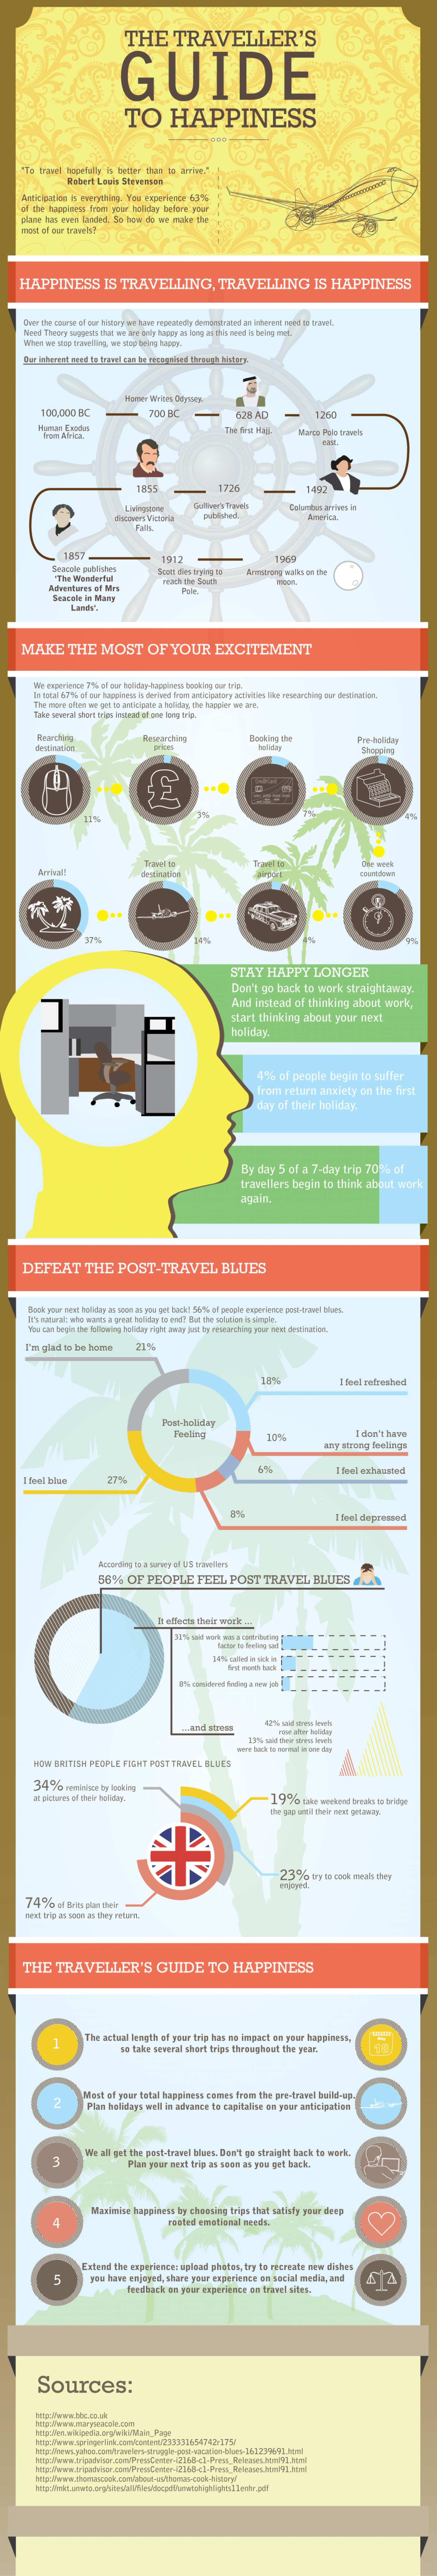 The Traveller’s Guide to Happiness Infographic